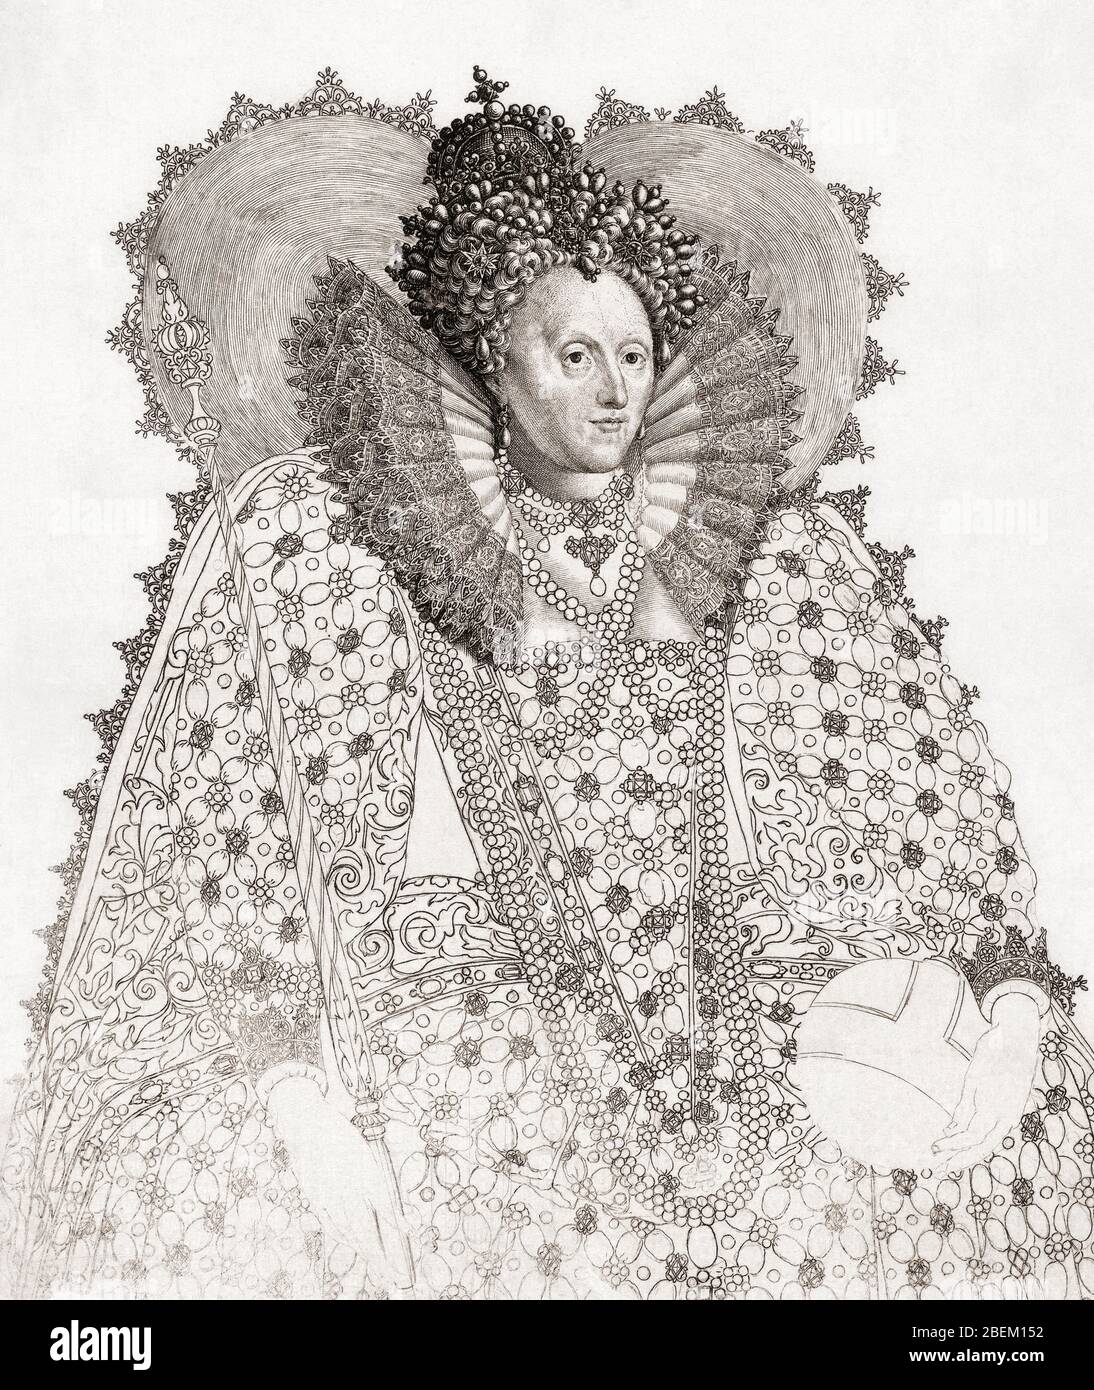 Elizabeth I, 1533 - 1603. Queen of England.  From a 17th century engraving by Crispijn van de Passe the Elder after a work by Isaac Oliver. Stock Photo